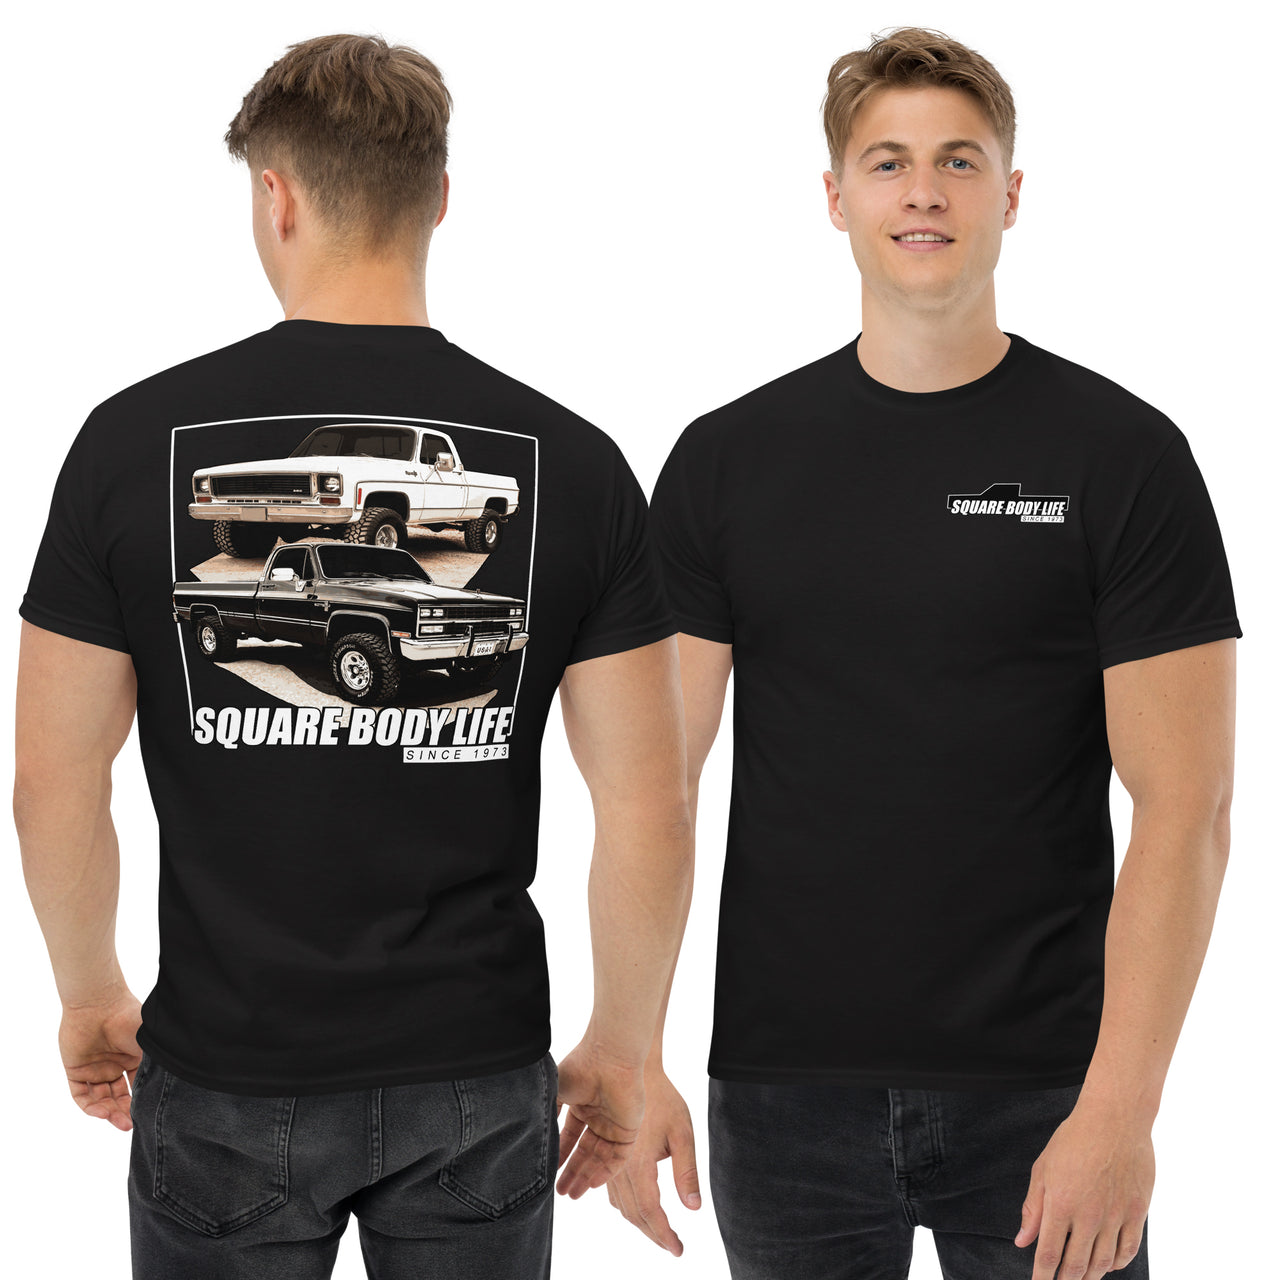 Square Body Life T-Shirt modeled in black